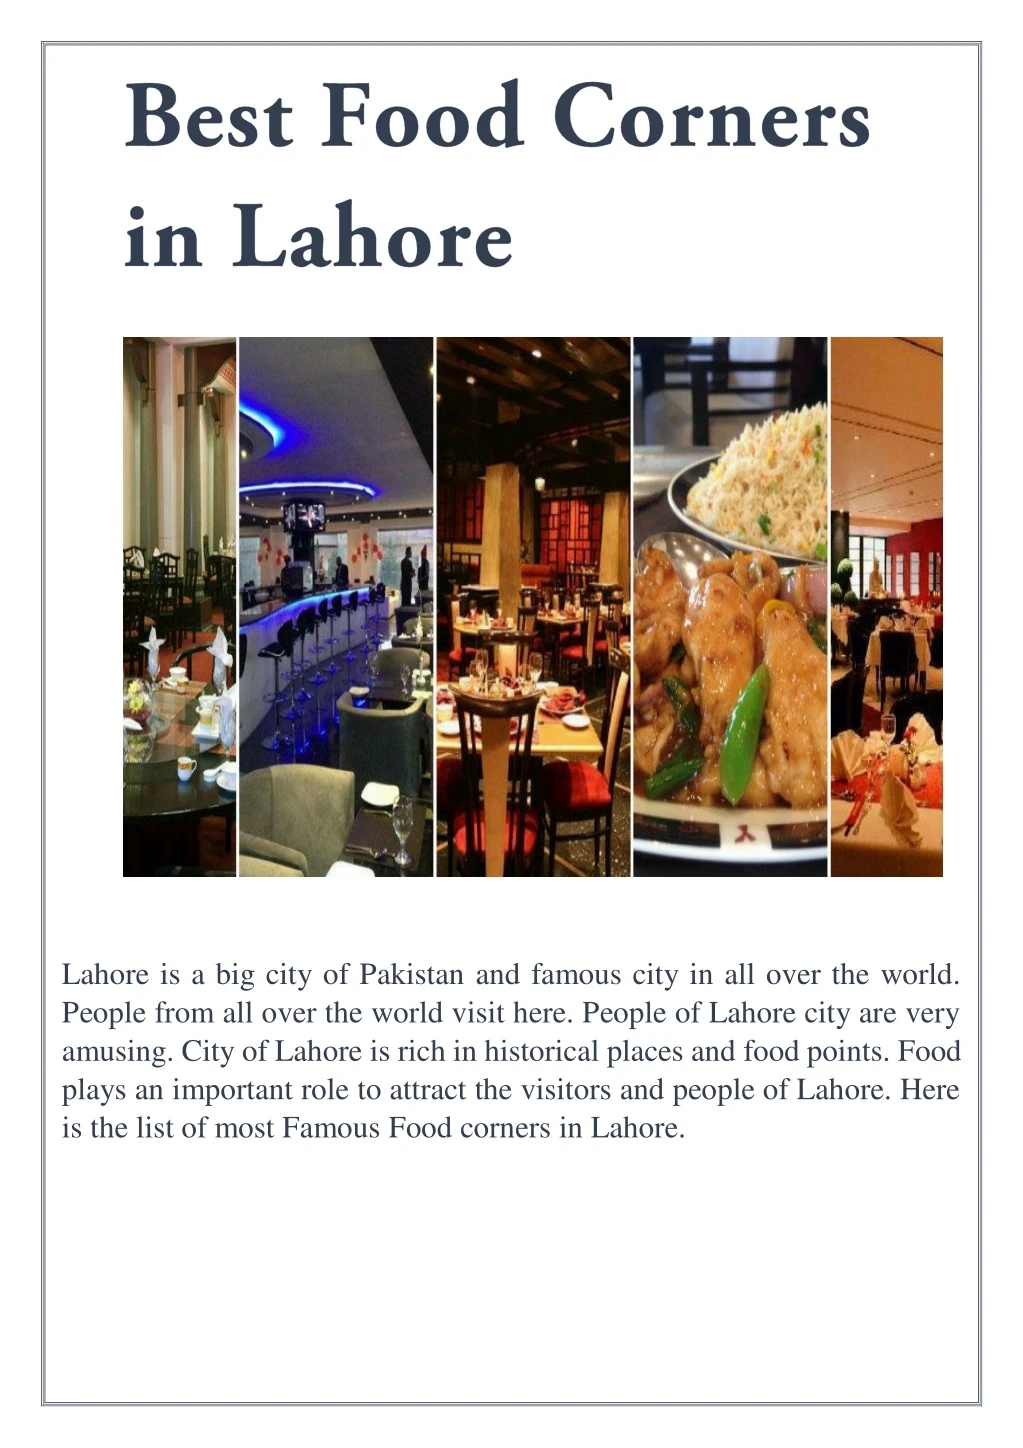 lahore is a big city of pakistan and famous city